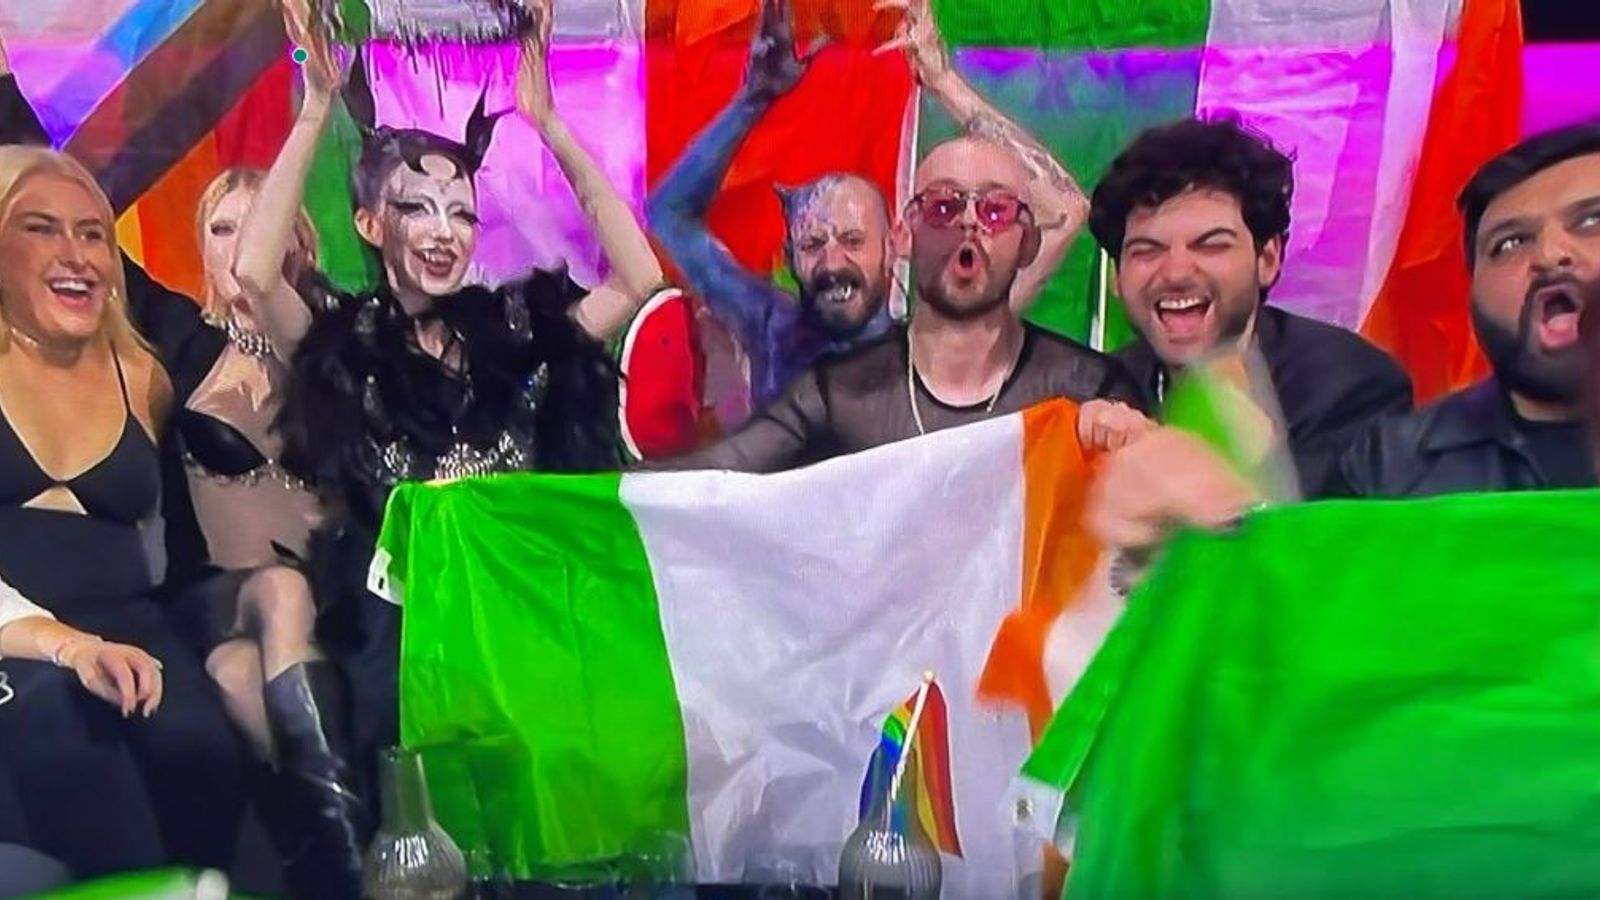 A wardrobe malfunction, a watermelon and nul points: Five Eurovision moments you might have missed | Ents & Arts News